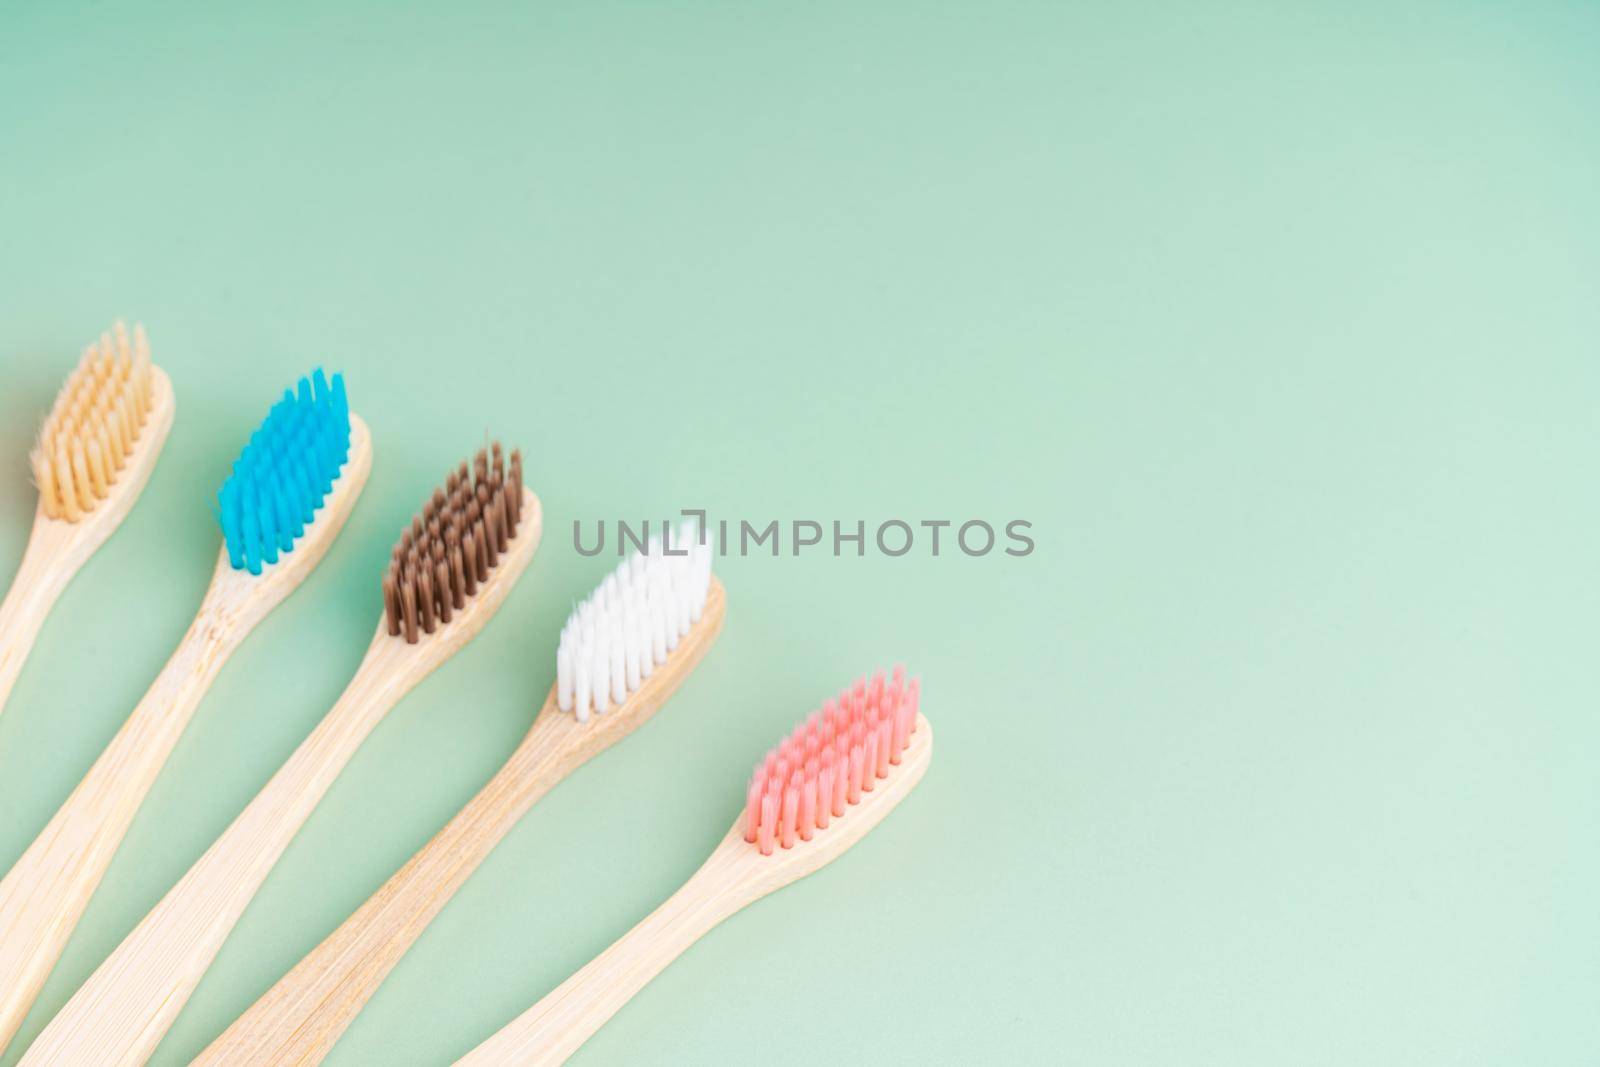 A set of Eco-friendly antibacterial toothbrushes made of bamboo wood on a light green background. Environmental care trends by Try_my_best